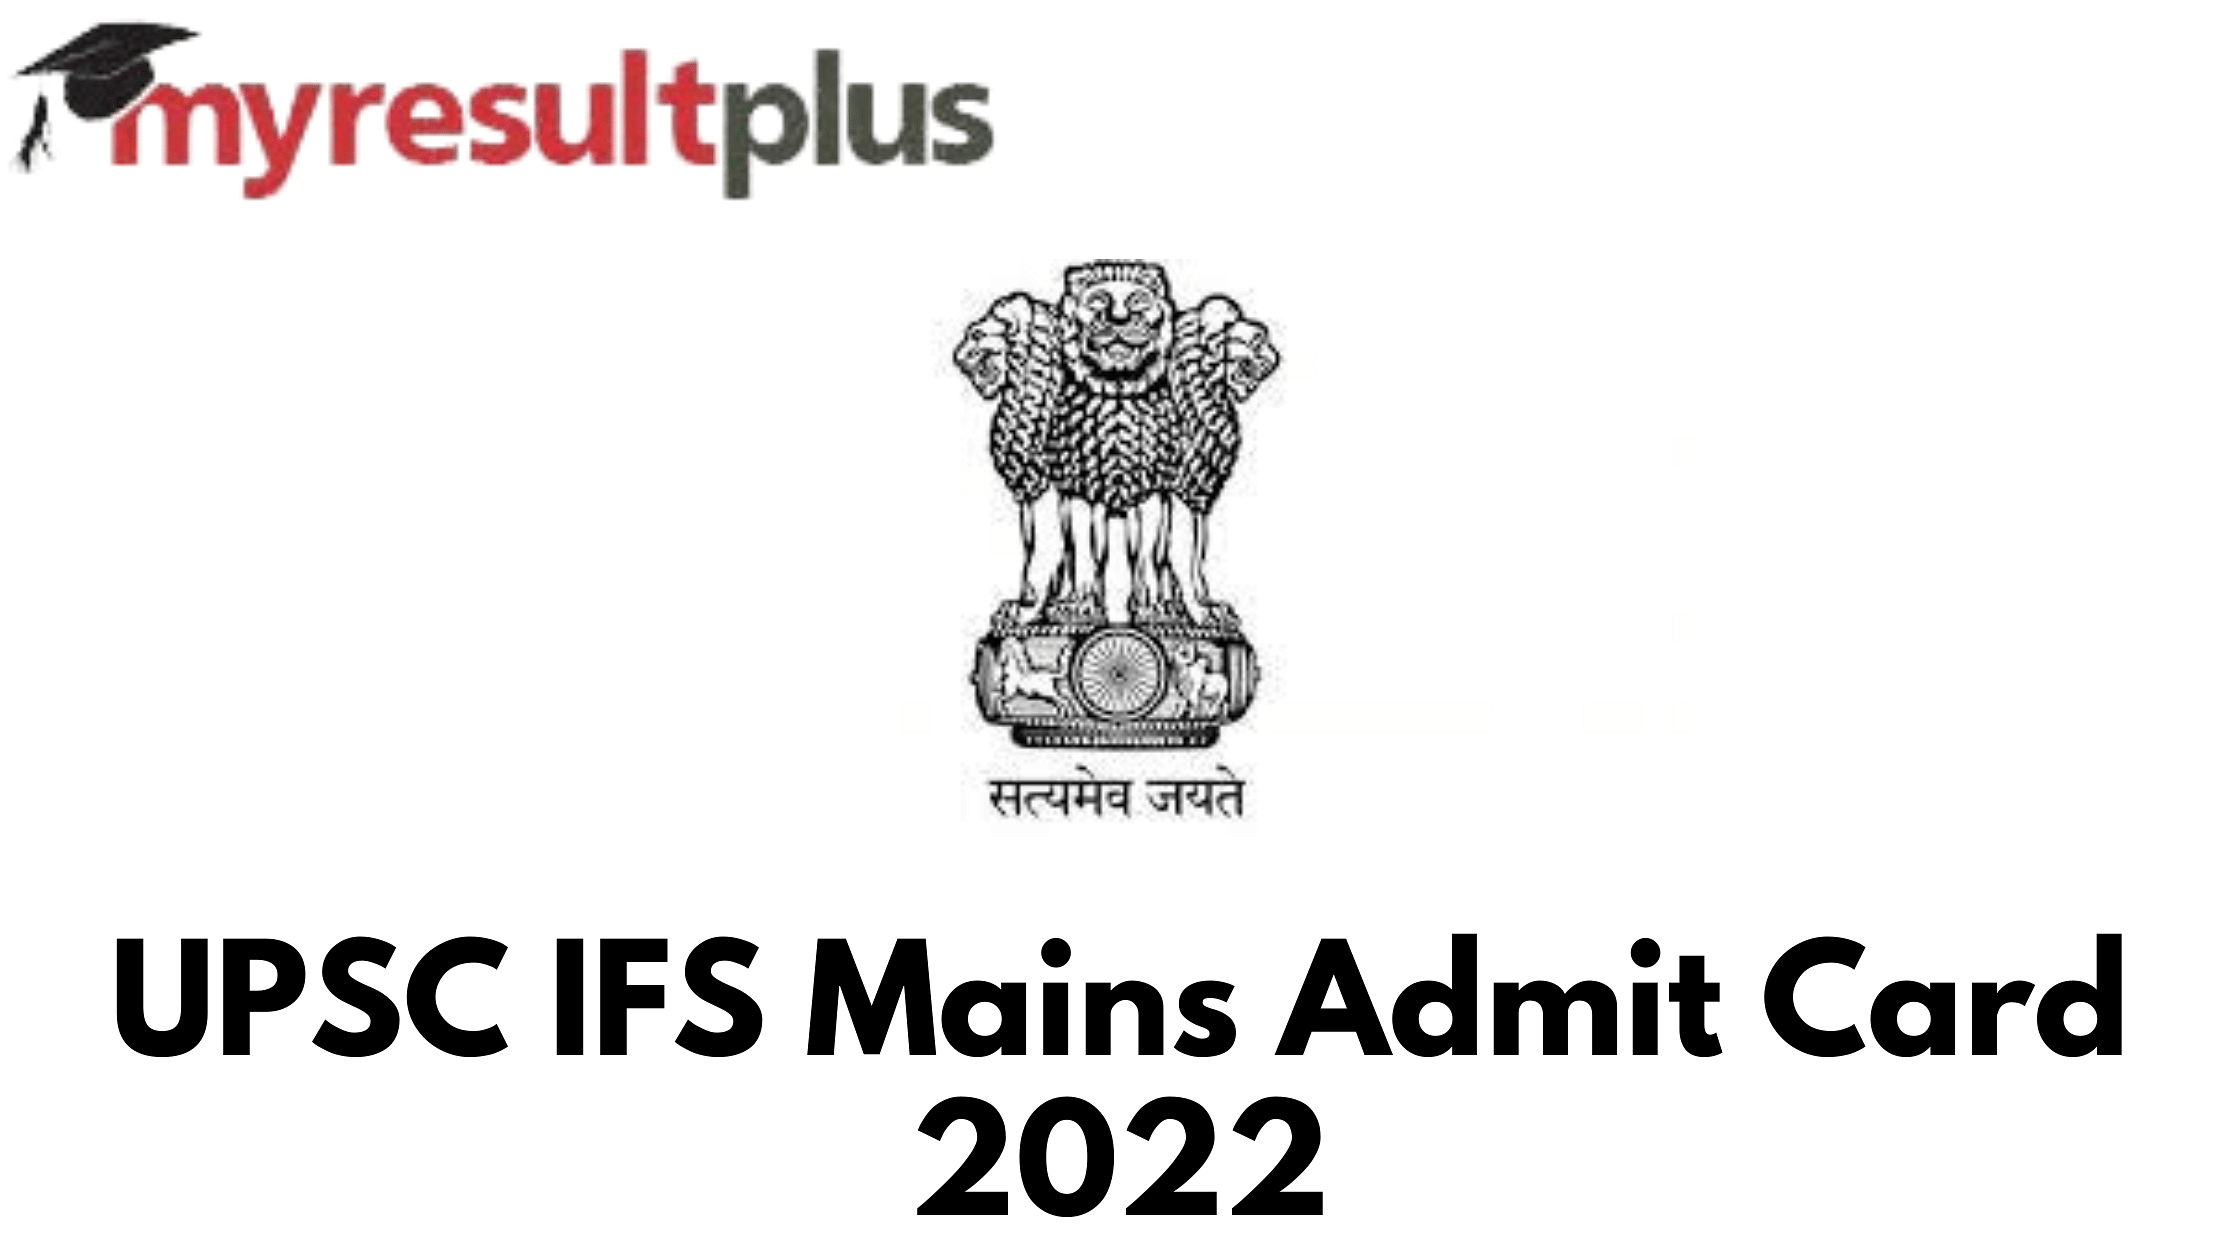 UPSC IFS Mains Admit Card 2022 Available for Download, Direct Link Here